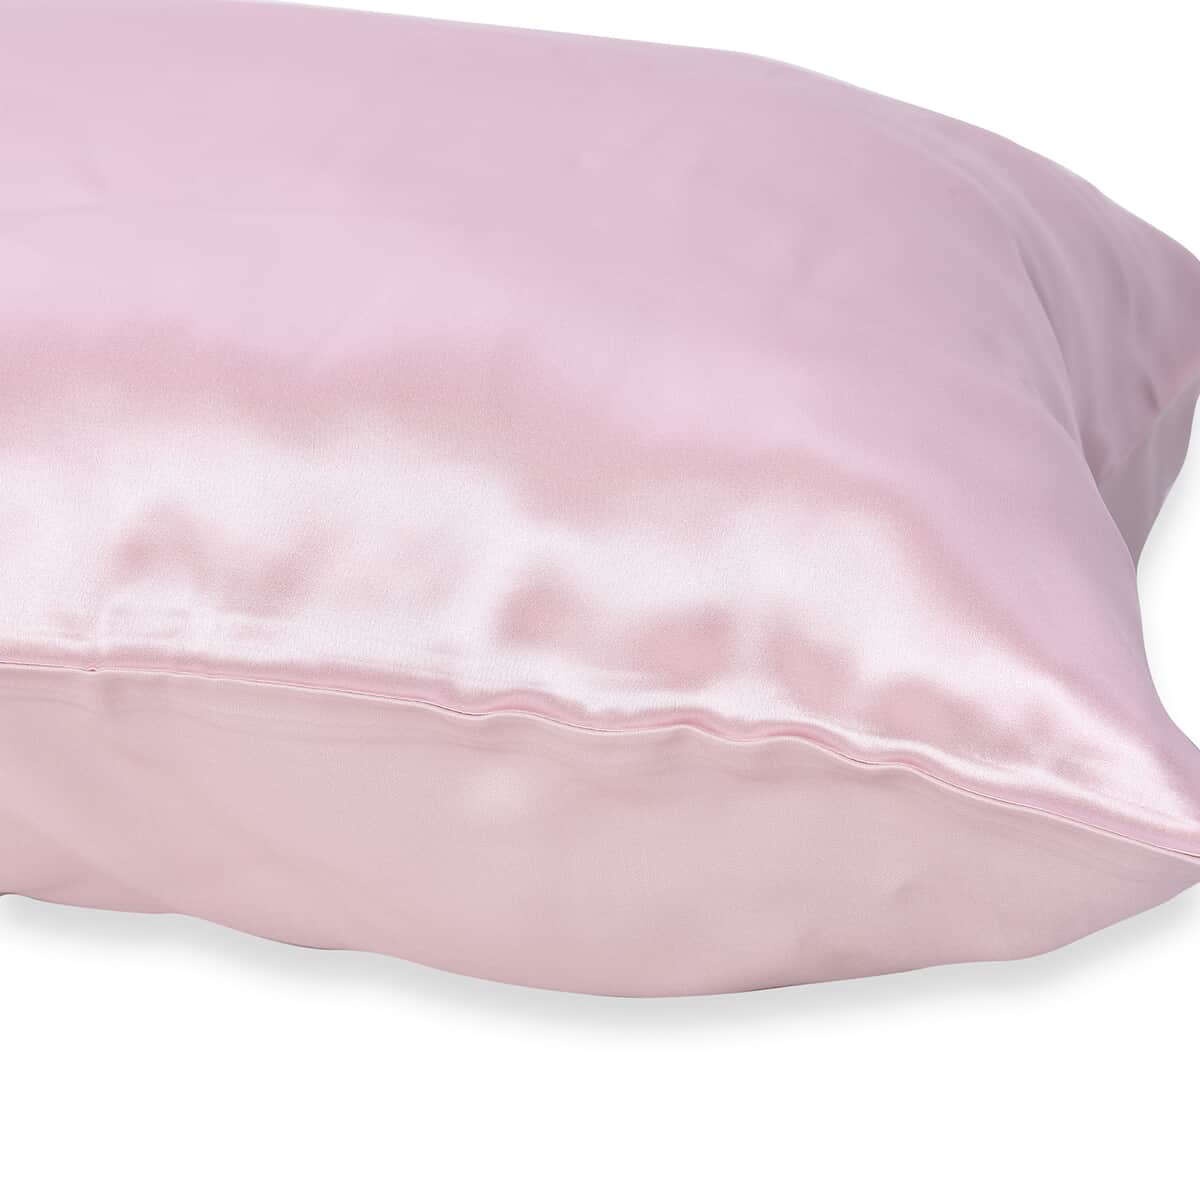 Symphony Home Pink 100% Mulberry Silk Pillowcase Infused with Hyaluronic Acid & Argan Oil - King, Pillow Protectors, Pillow Cover, Cushion Cover, Pillow Shams, Pillow Case Covers image number 2